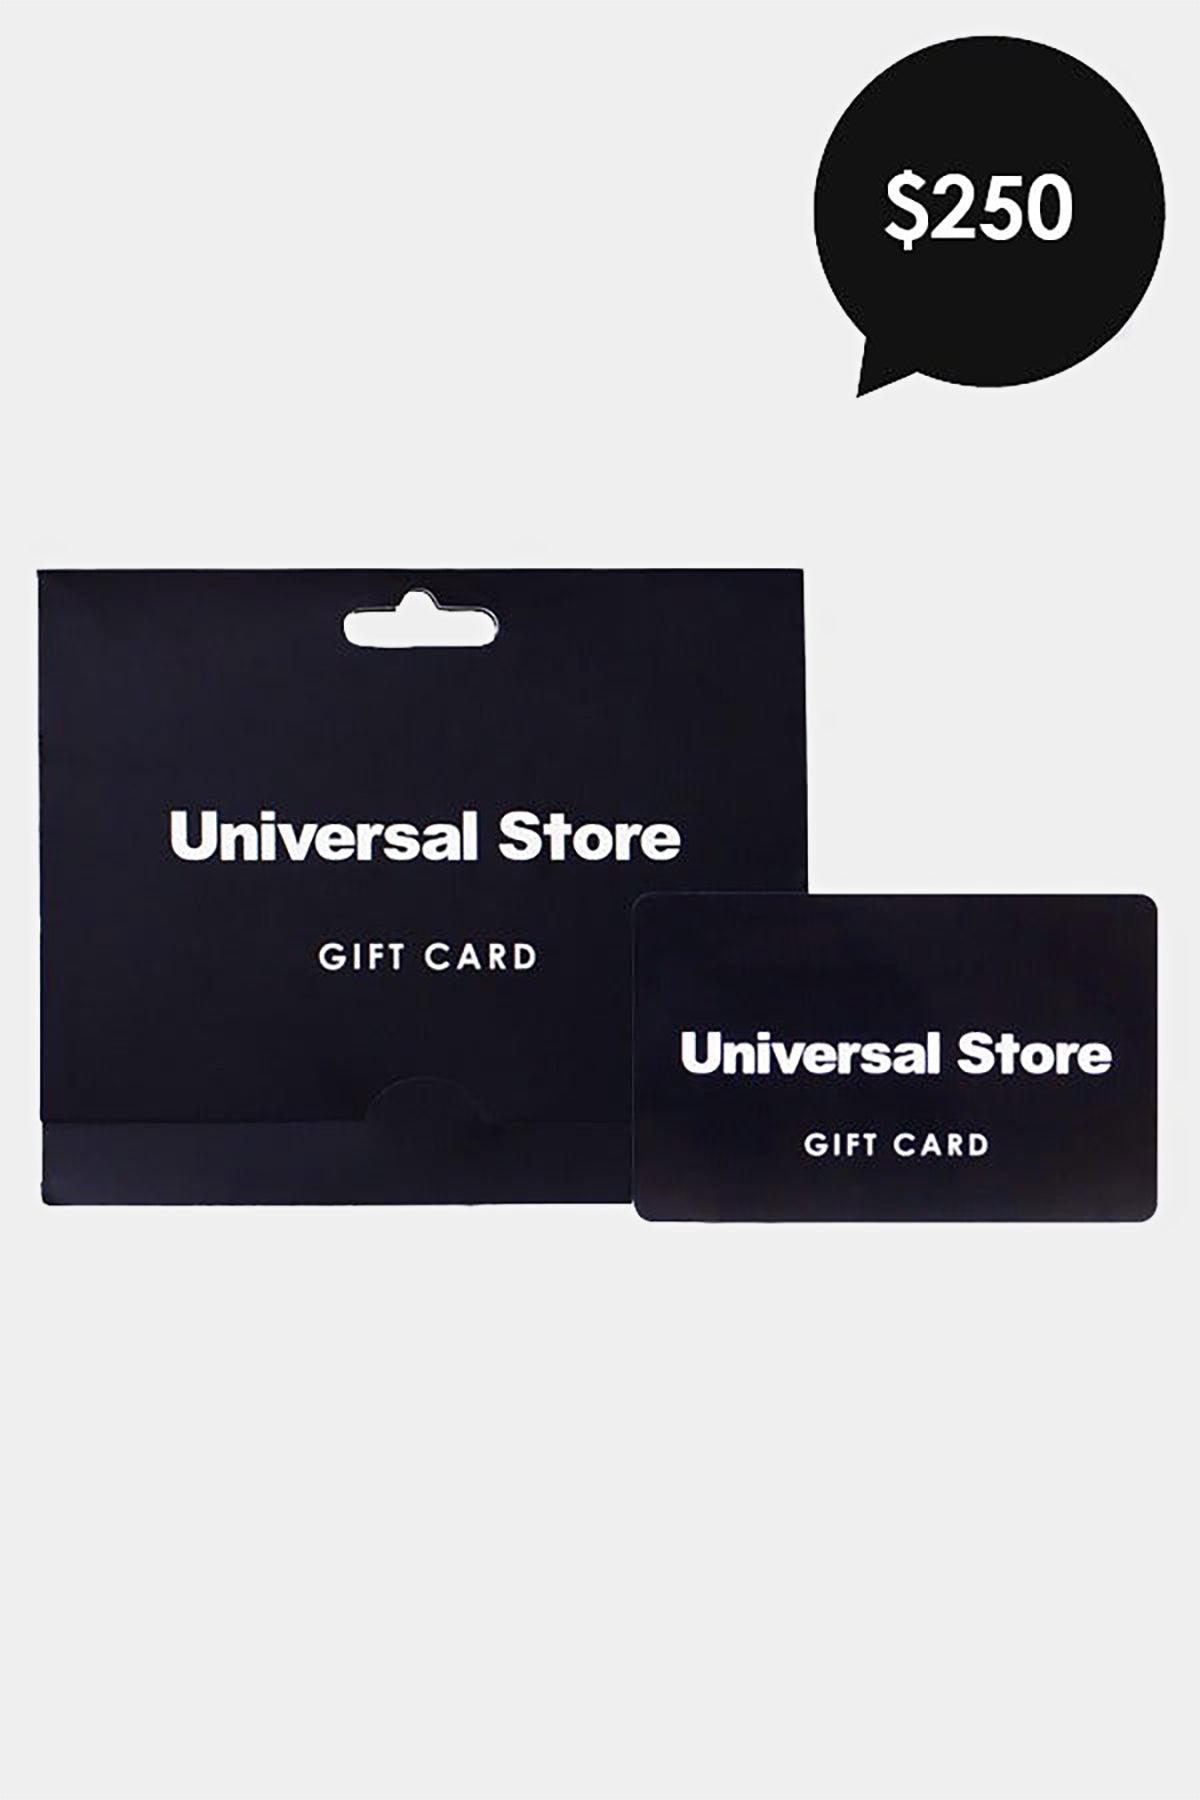 Universal Store $250 Gift Card